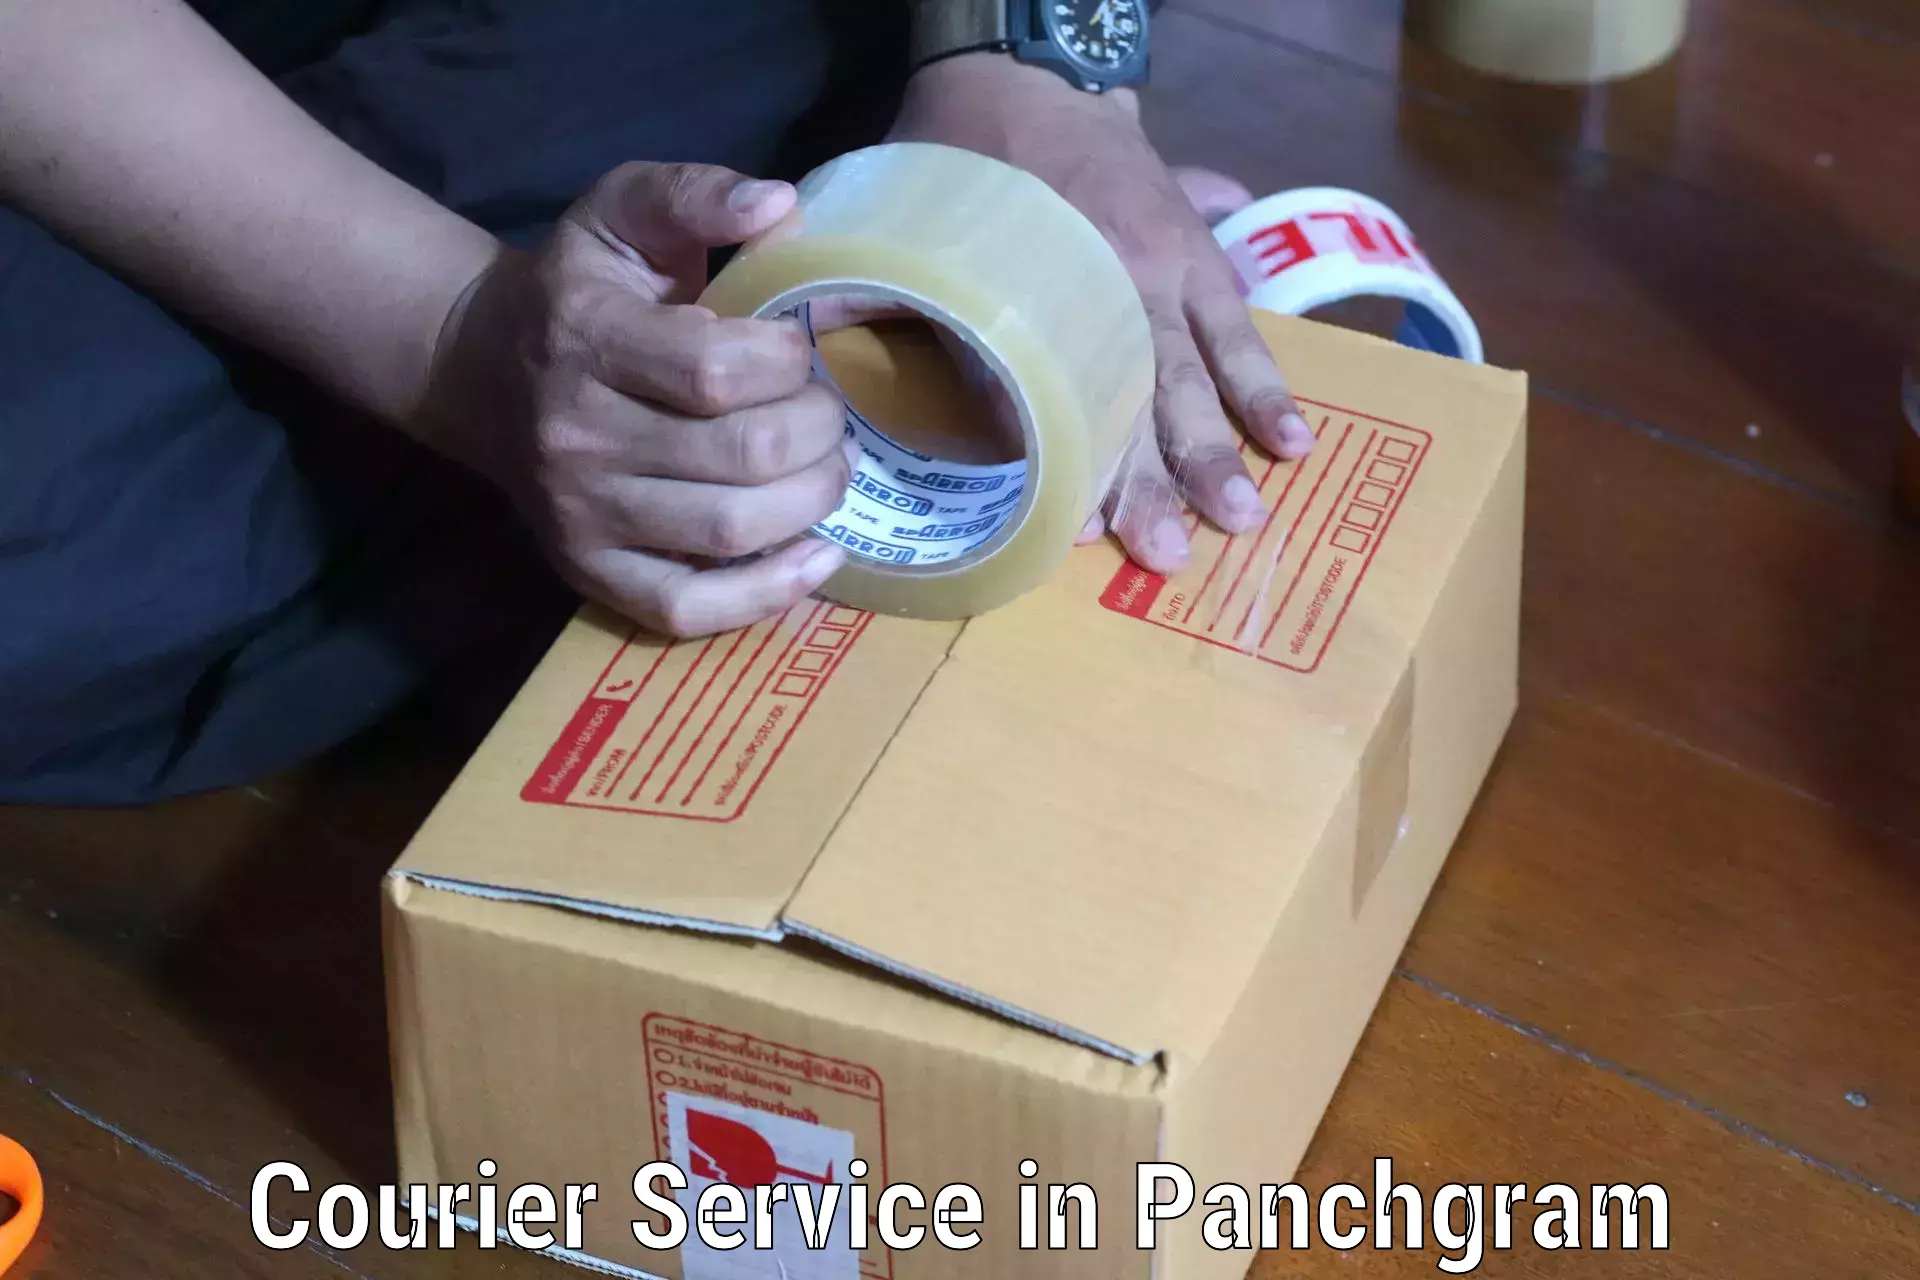 Next-day delivery options in Panchgram